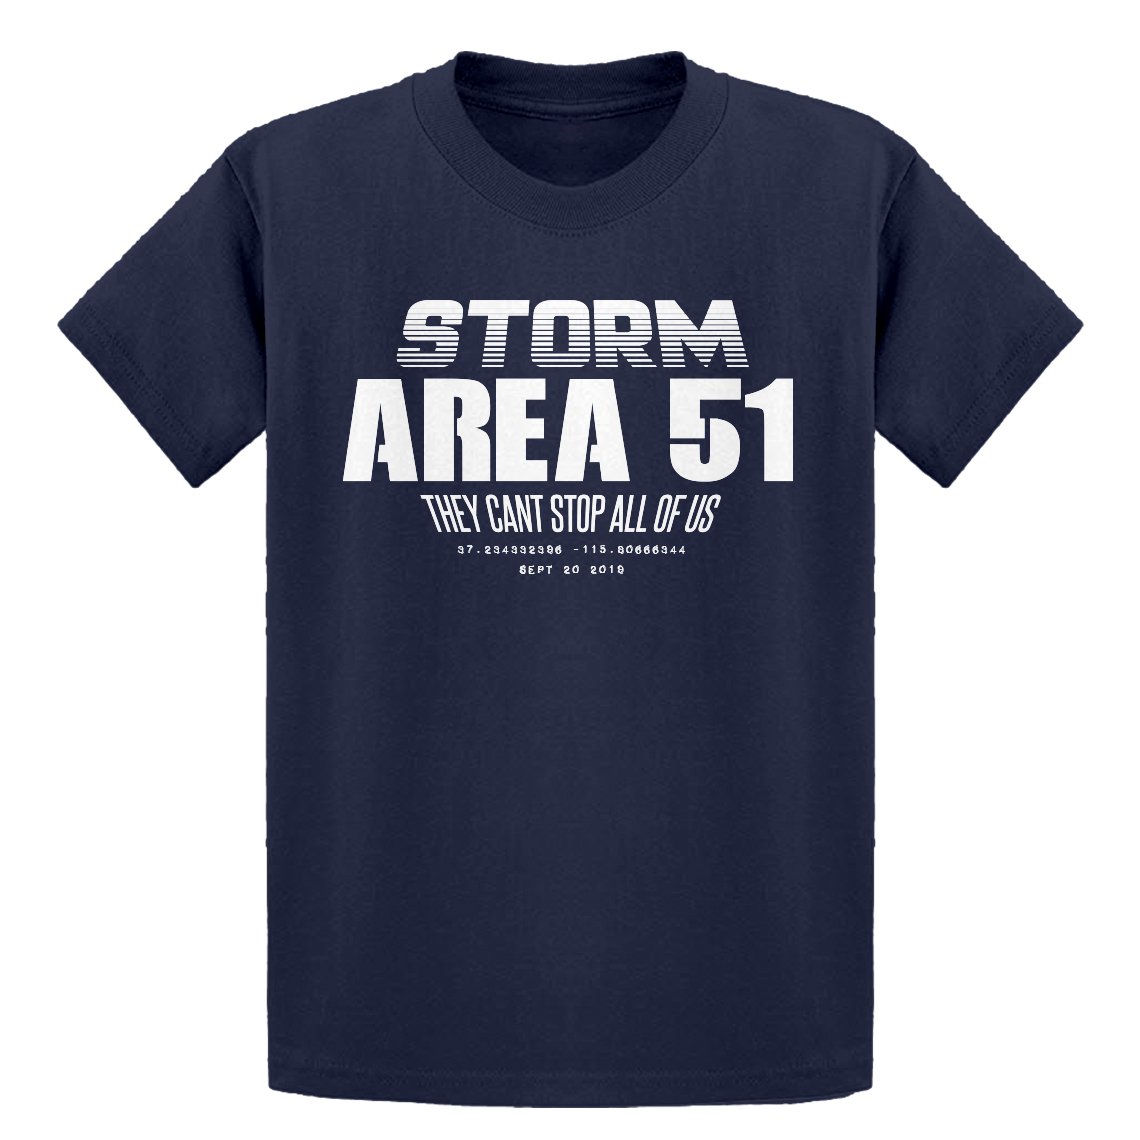 Storm Area 51 Shirts Youth Oof Youth XL 14 Purple Kids T-Shirt 